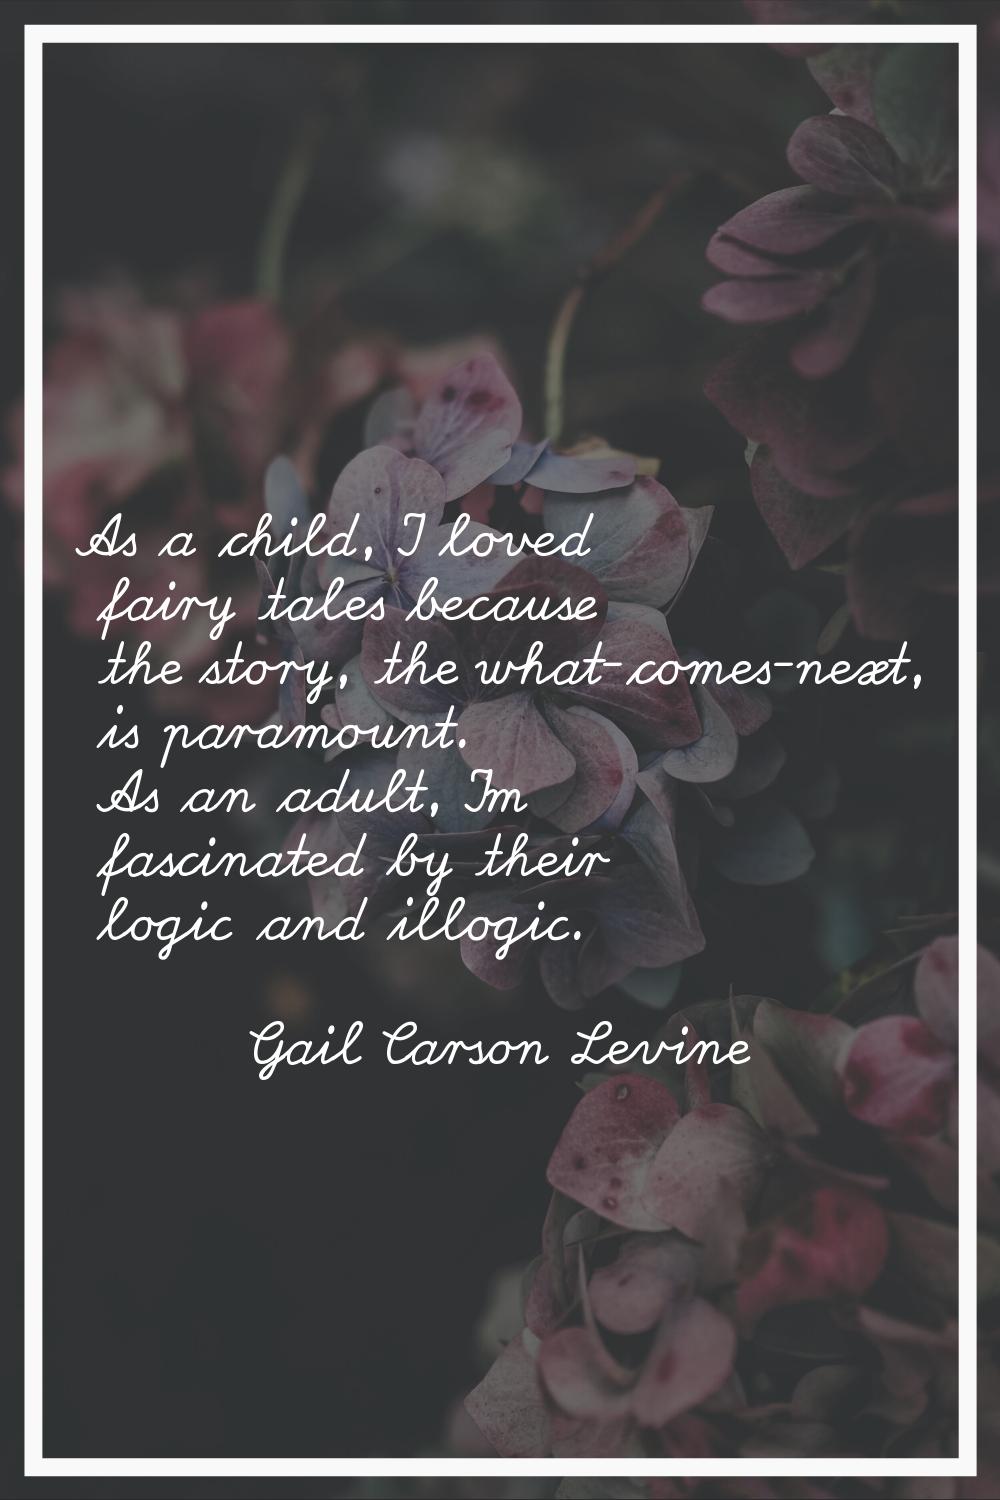 As a child, I loved fairy tales because the story, the what-comes-next, is paramount. As an adult, 